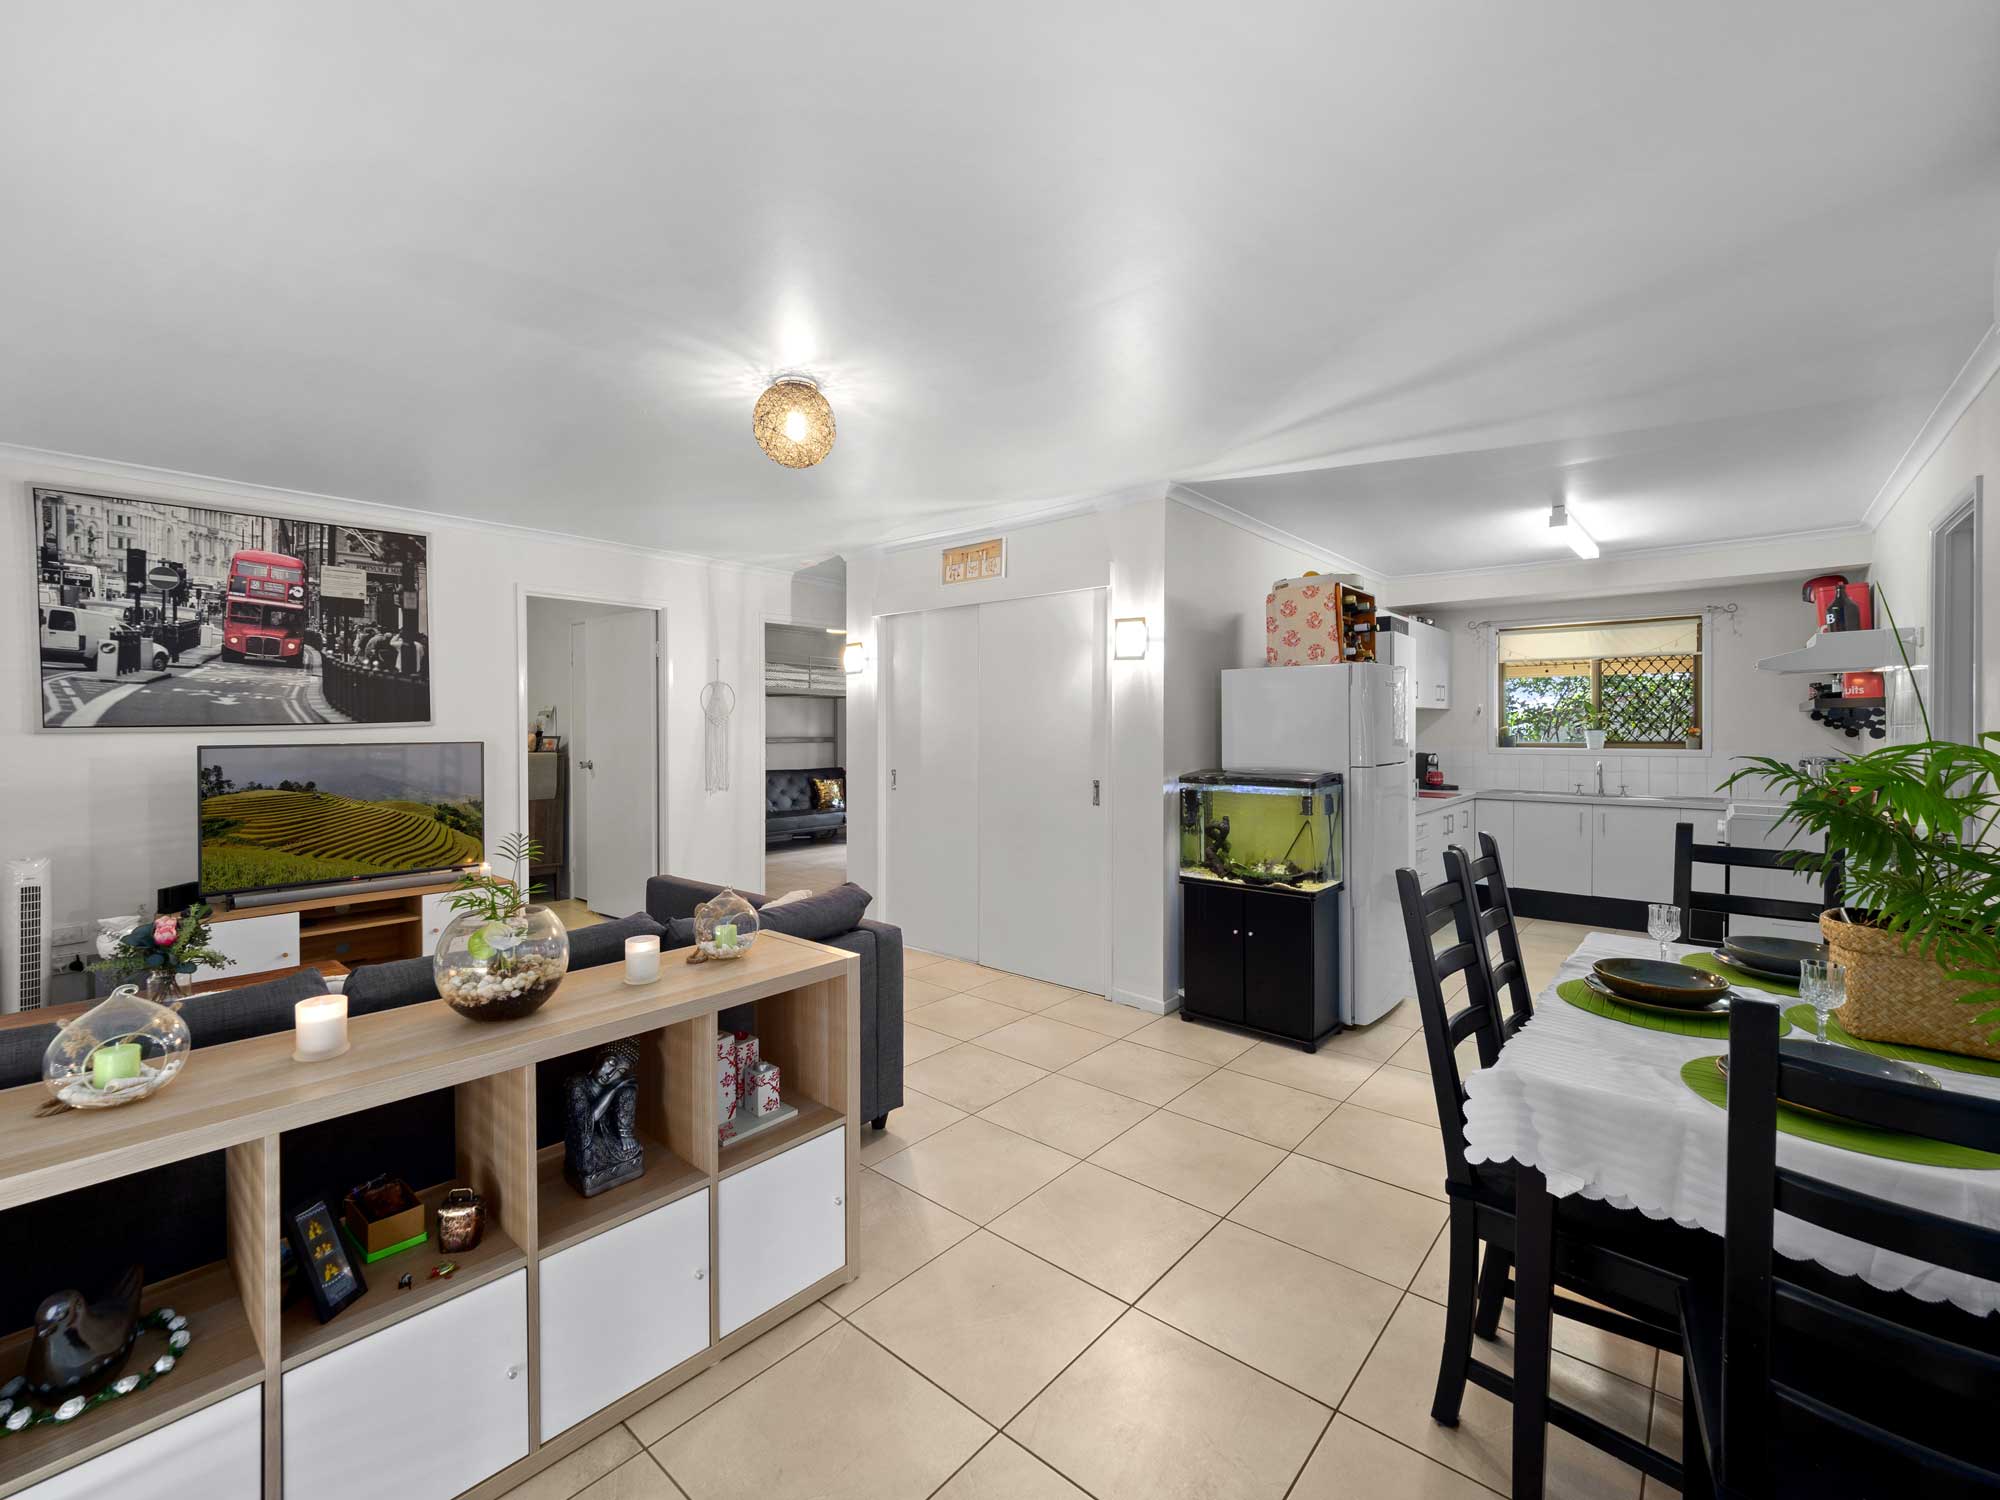 Capturing the kitchen area of the home for sale at Mitchelton